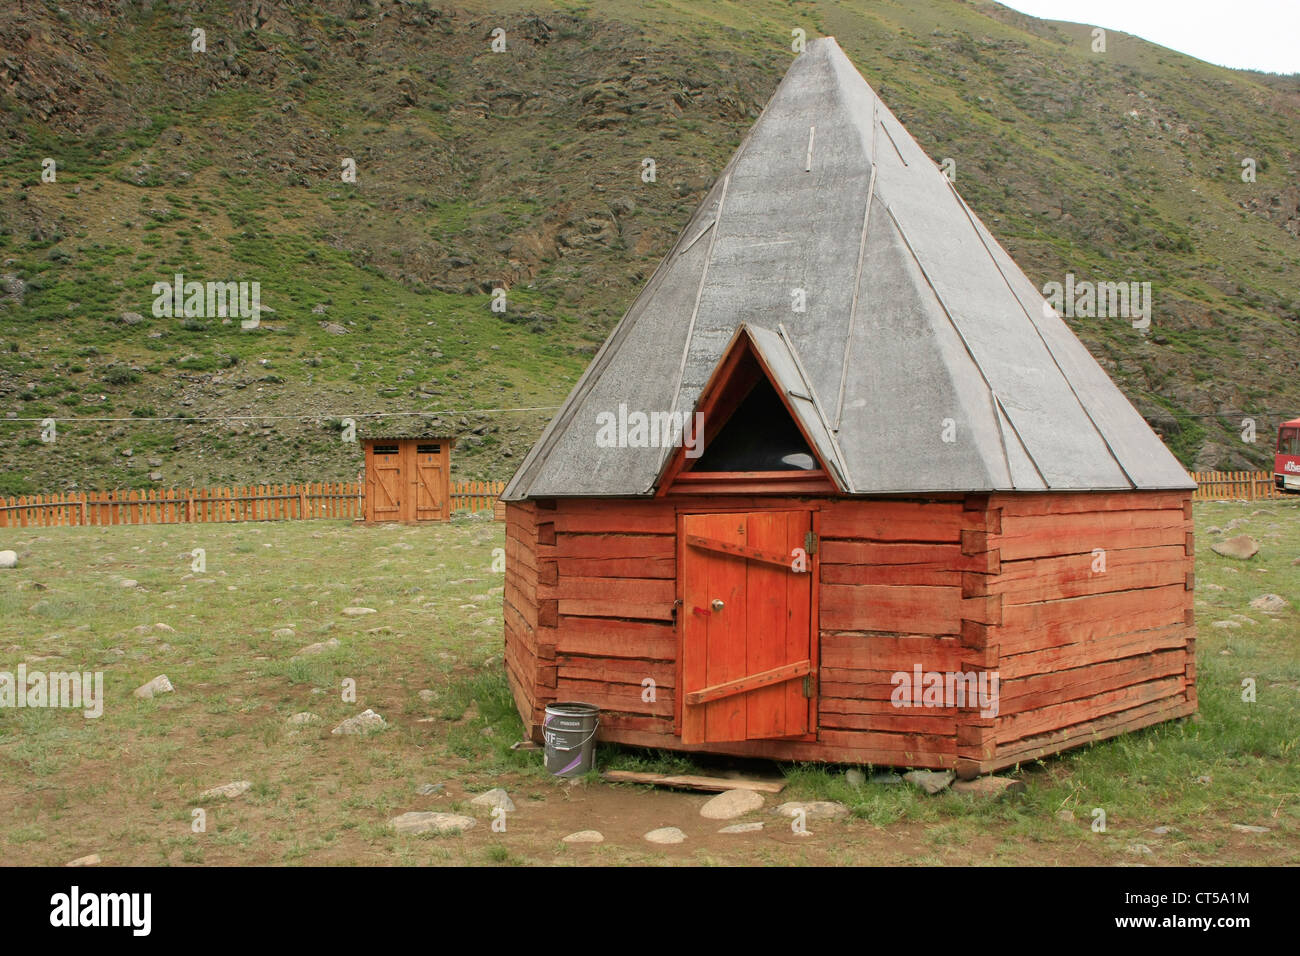 Ail, traditional wooden house of Altai people, River Chulyshman Valley, Altai, Siberia, Russia Stock Photo